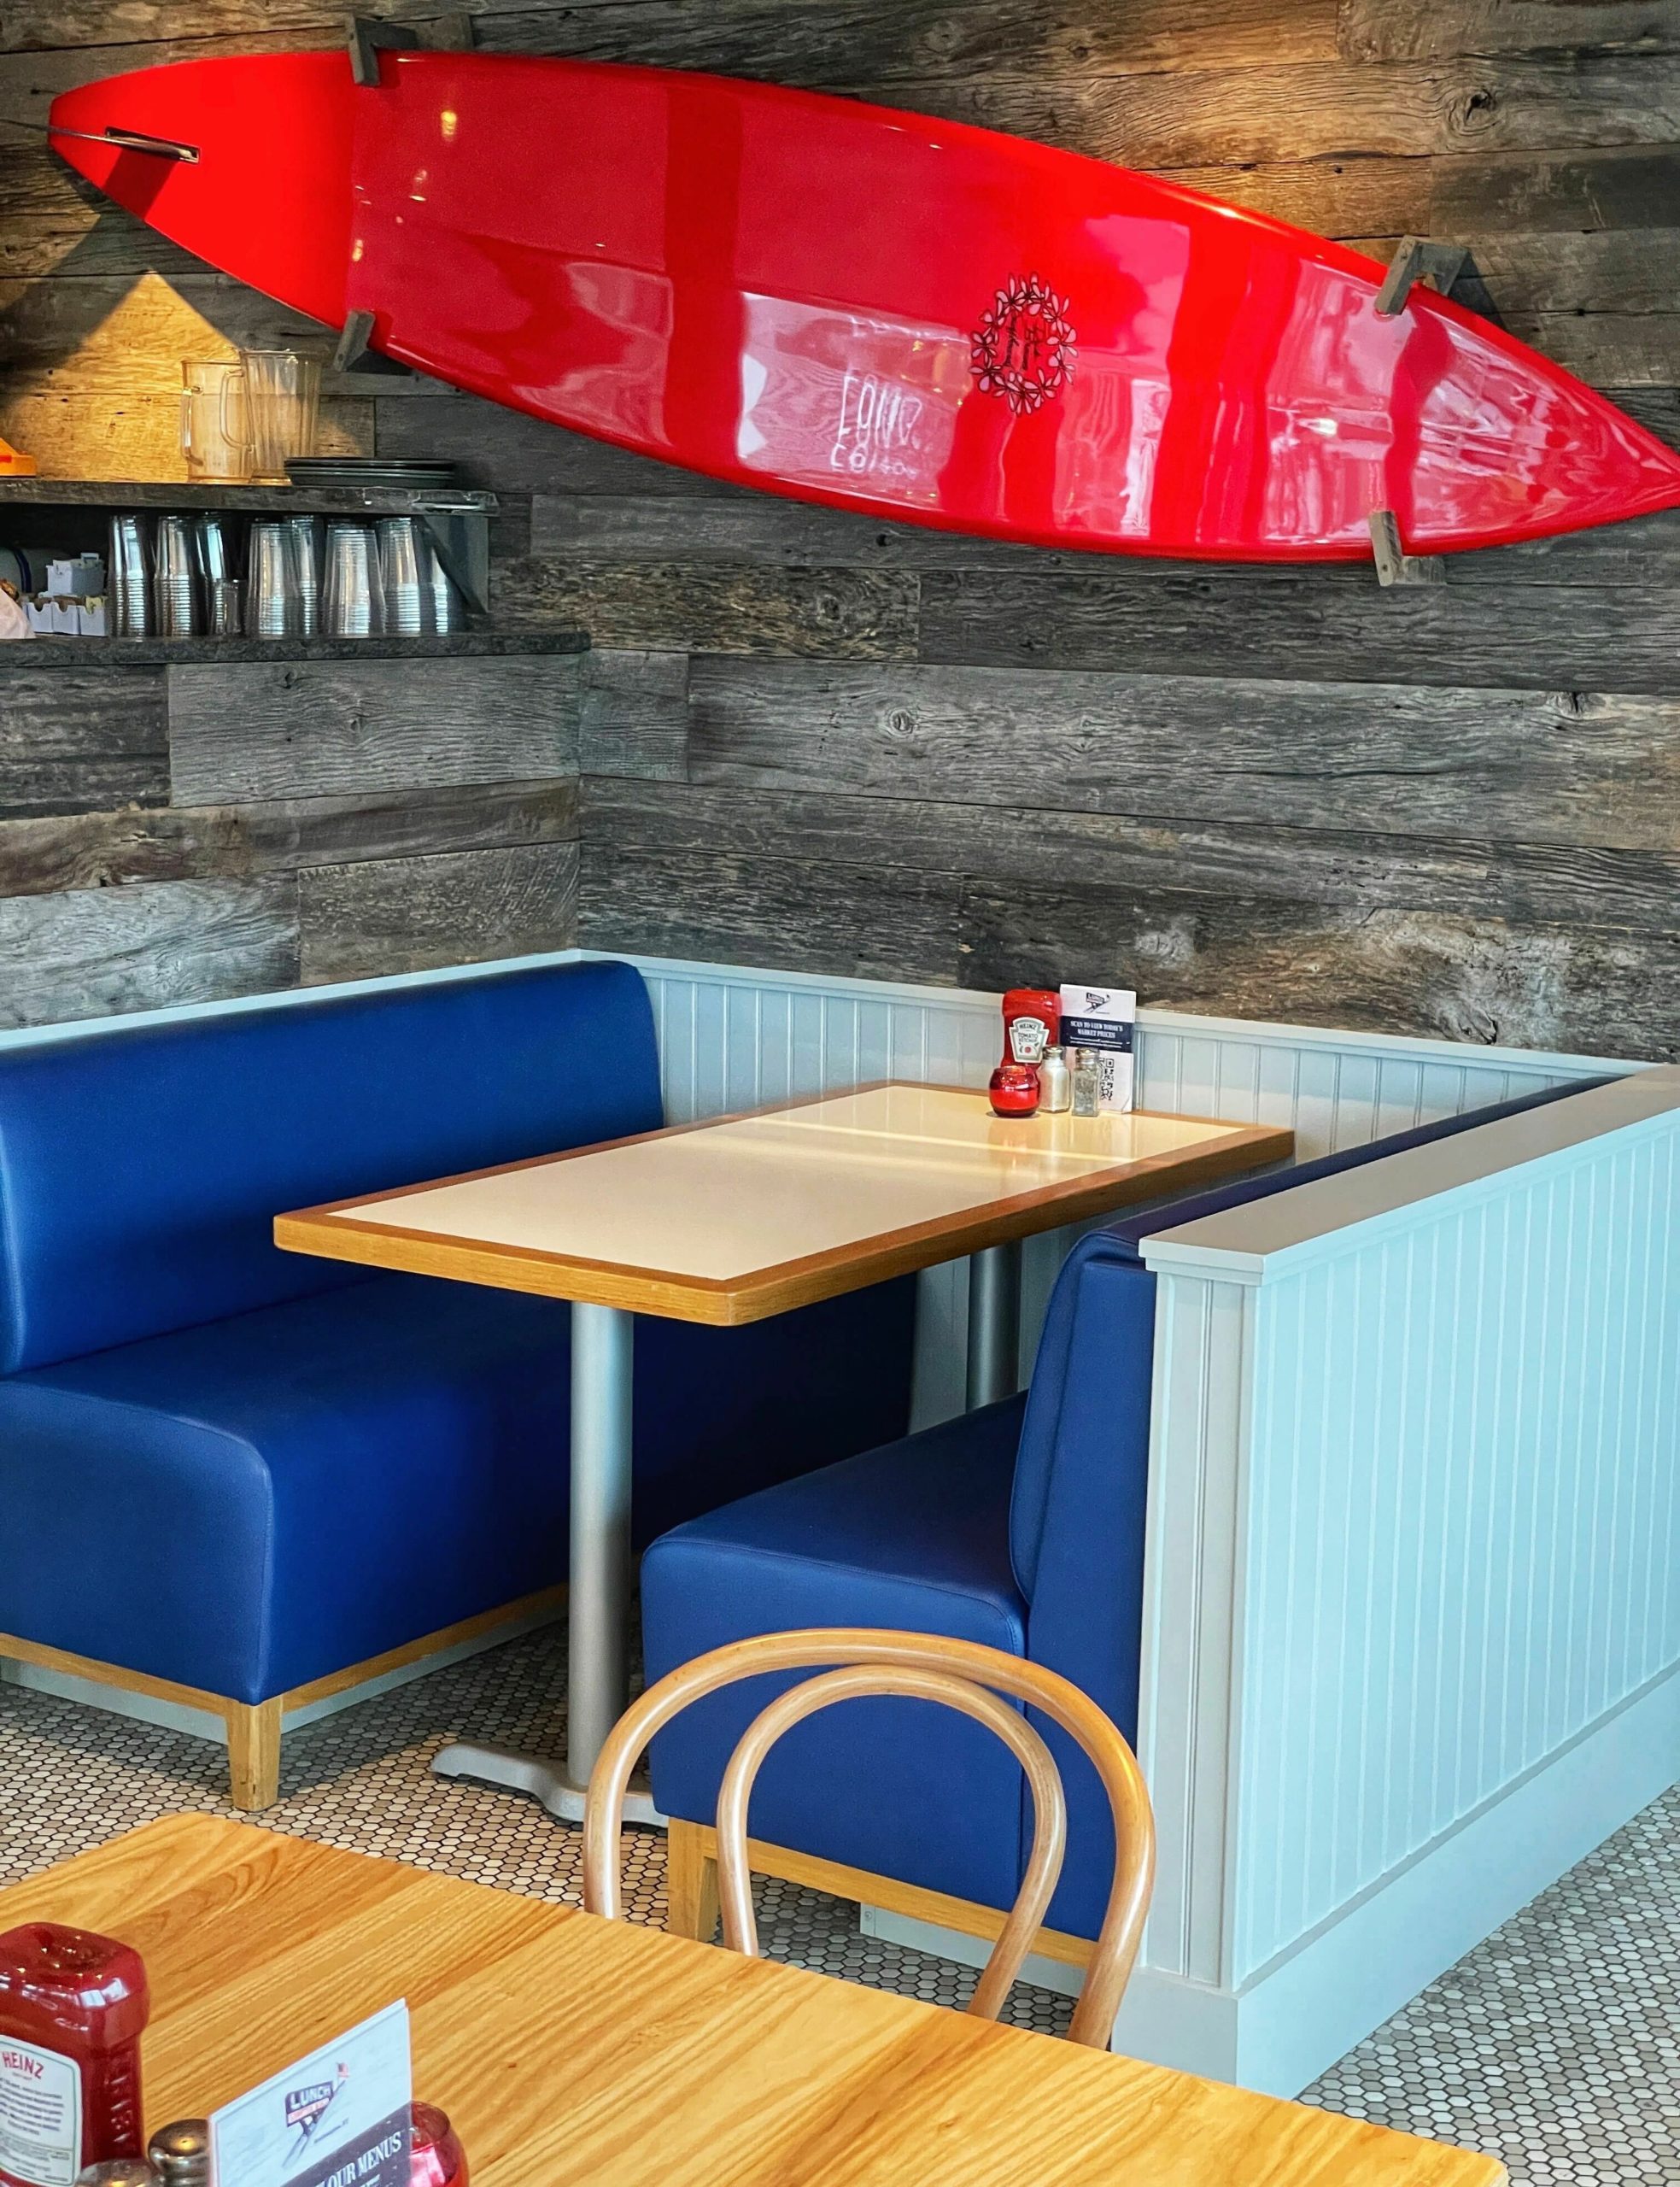 The interior of the Lobster Roll in Southampton.